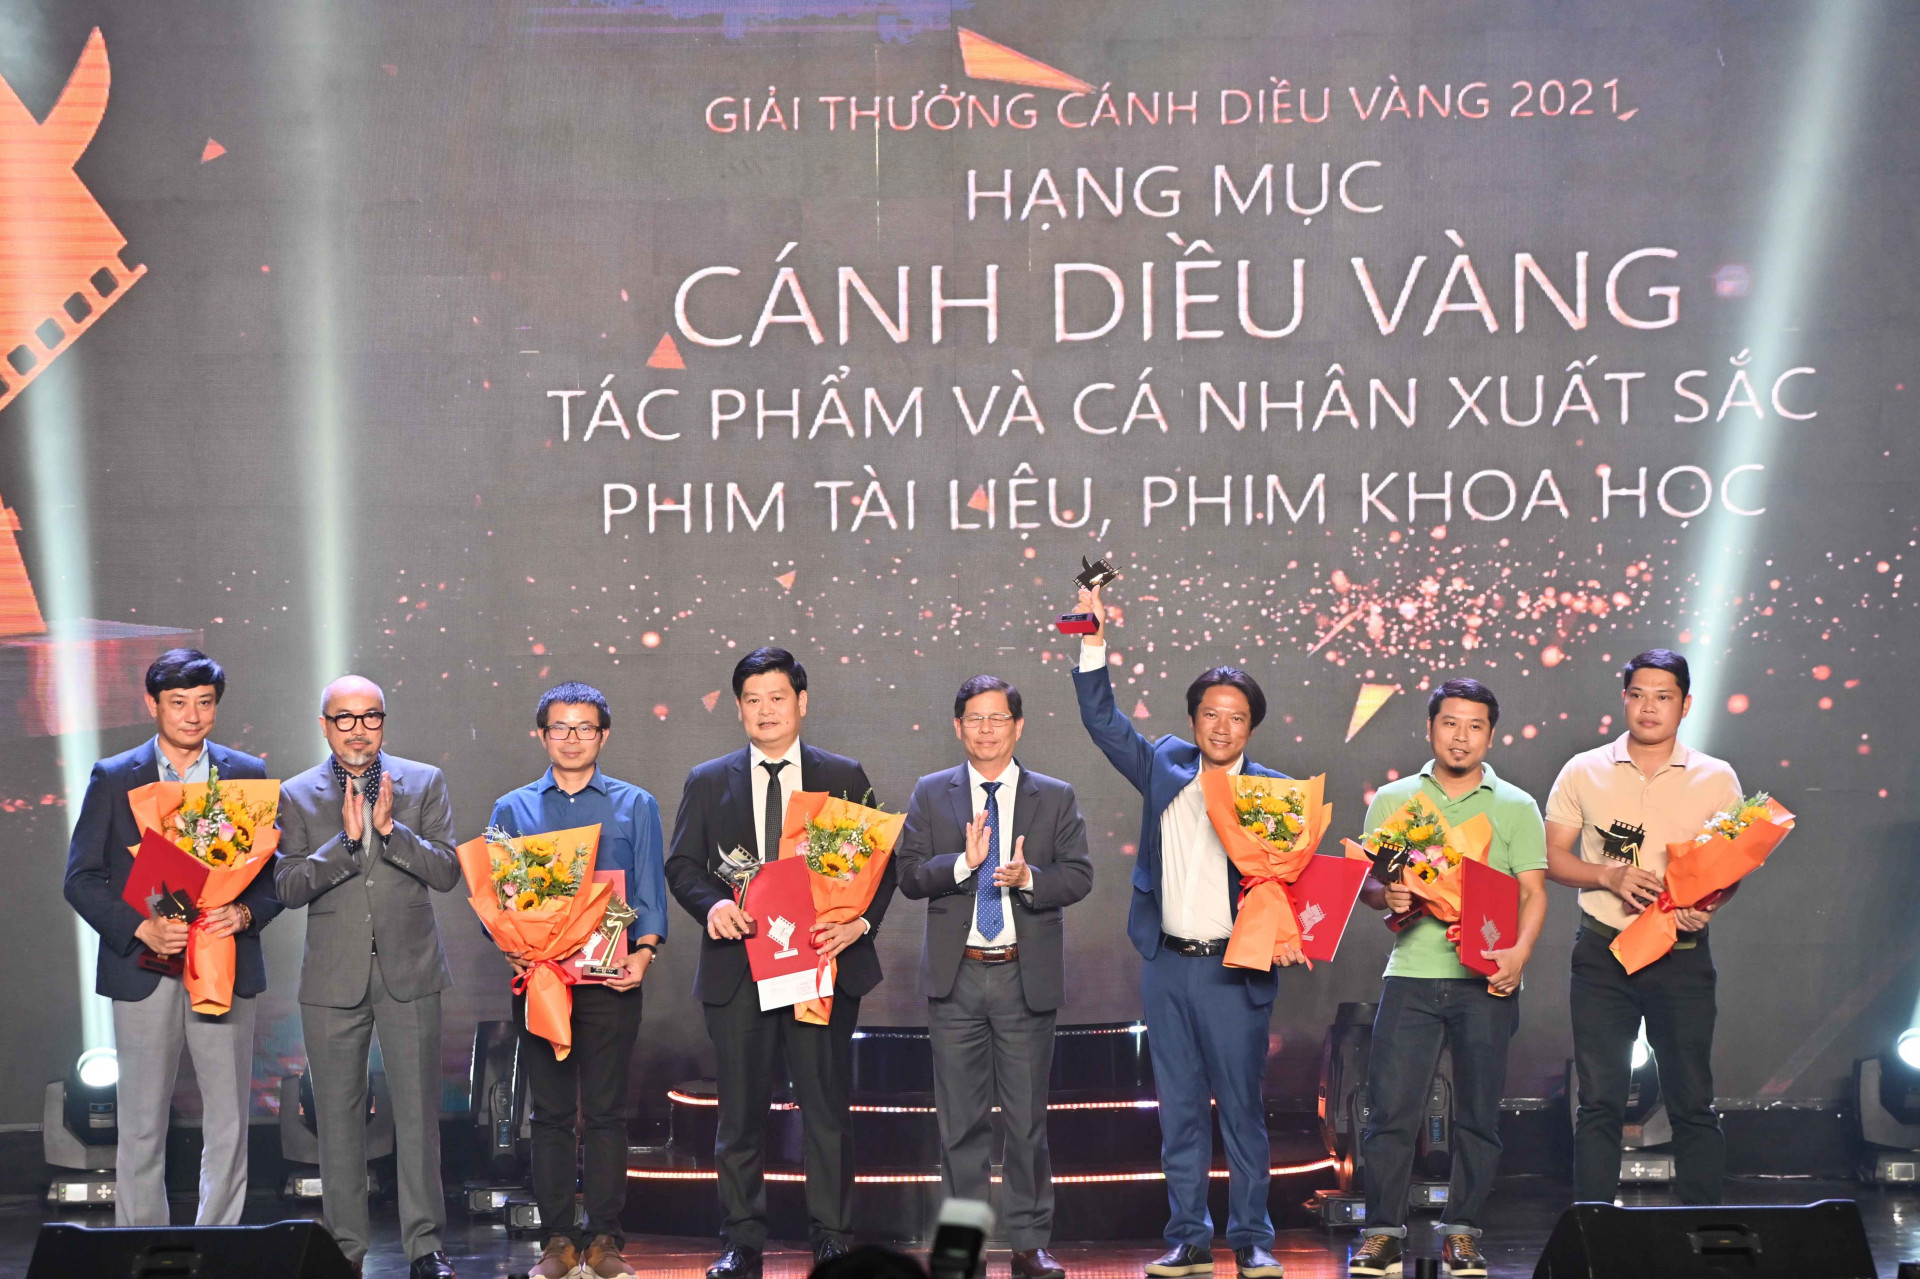 Nguyen Tan Tuan awarding gold prizes to excellent works and individuals in documentary and scientific film categories